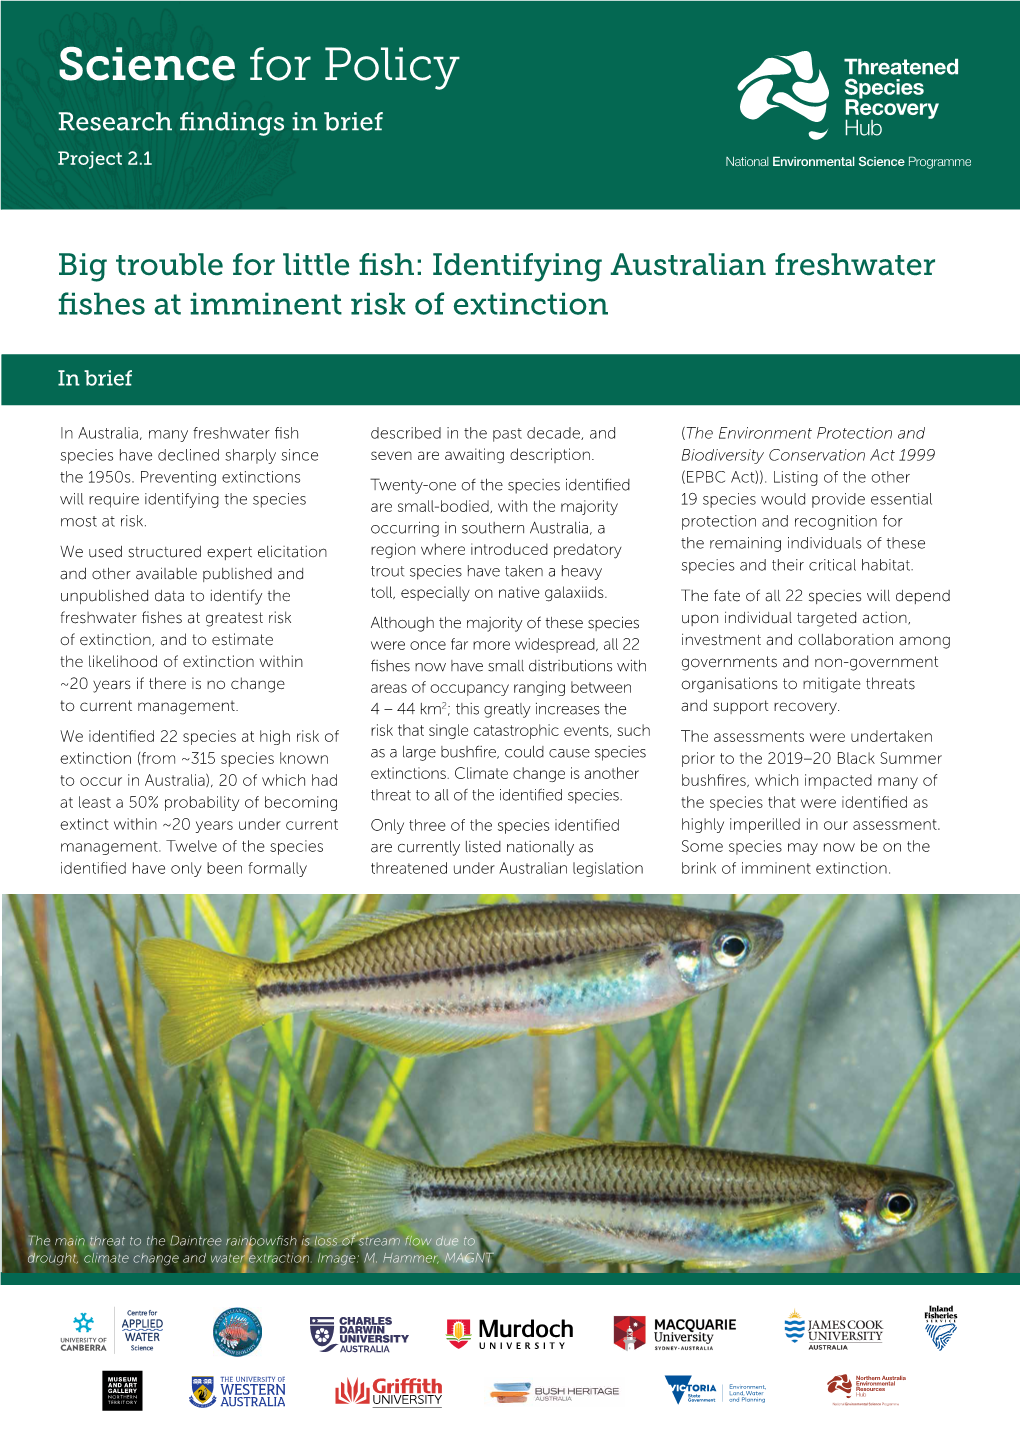 Fact Sheet: Big Trouble for Little Fish